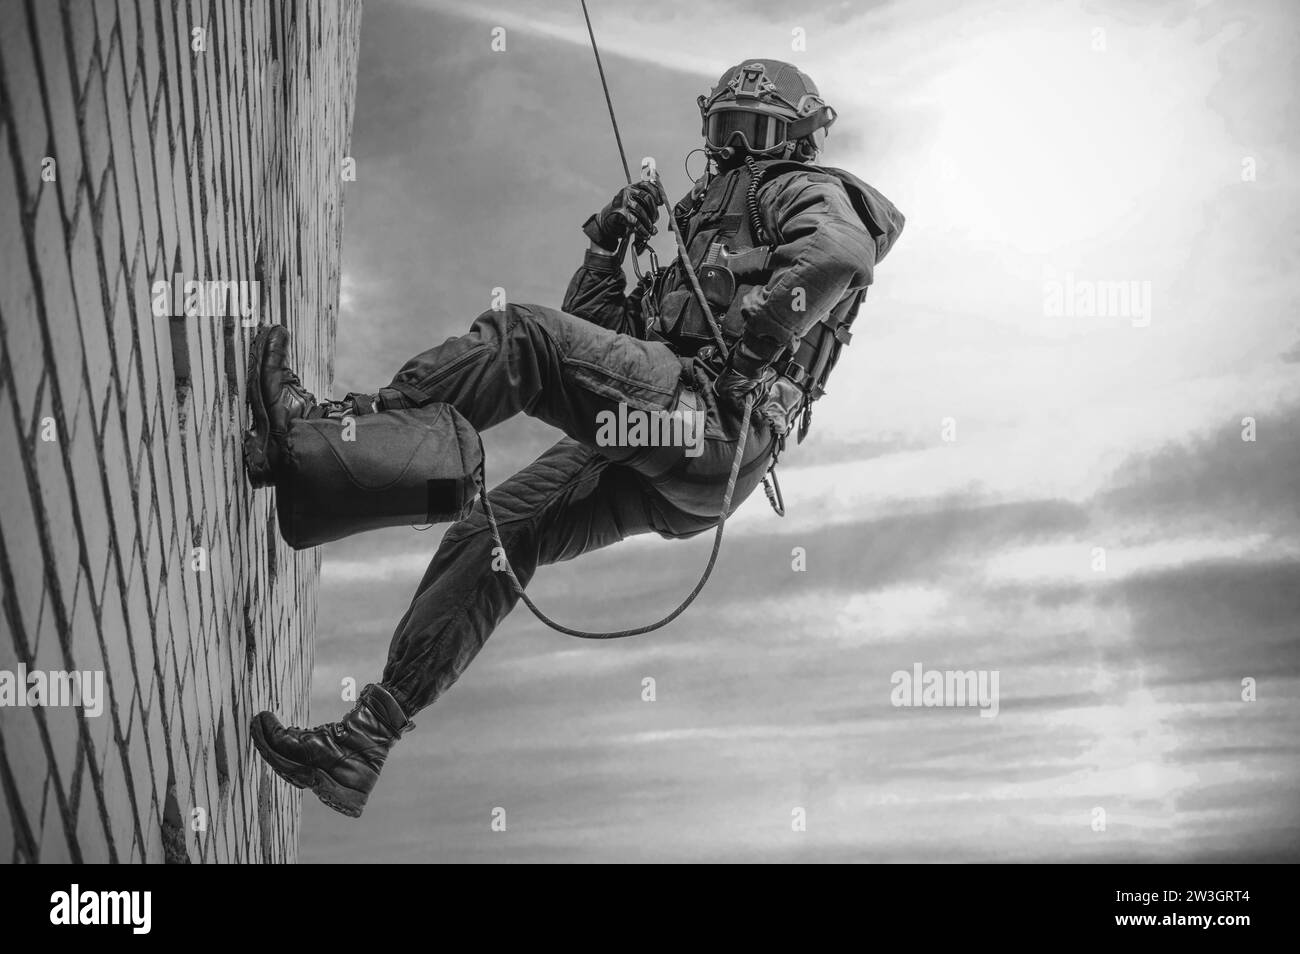 Special forces fighter descends from a skyscraper to storm the apartment. SWAT, police, counter terrorism concept. Mixed media Stock Photo